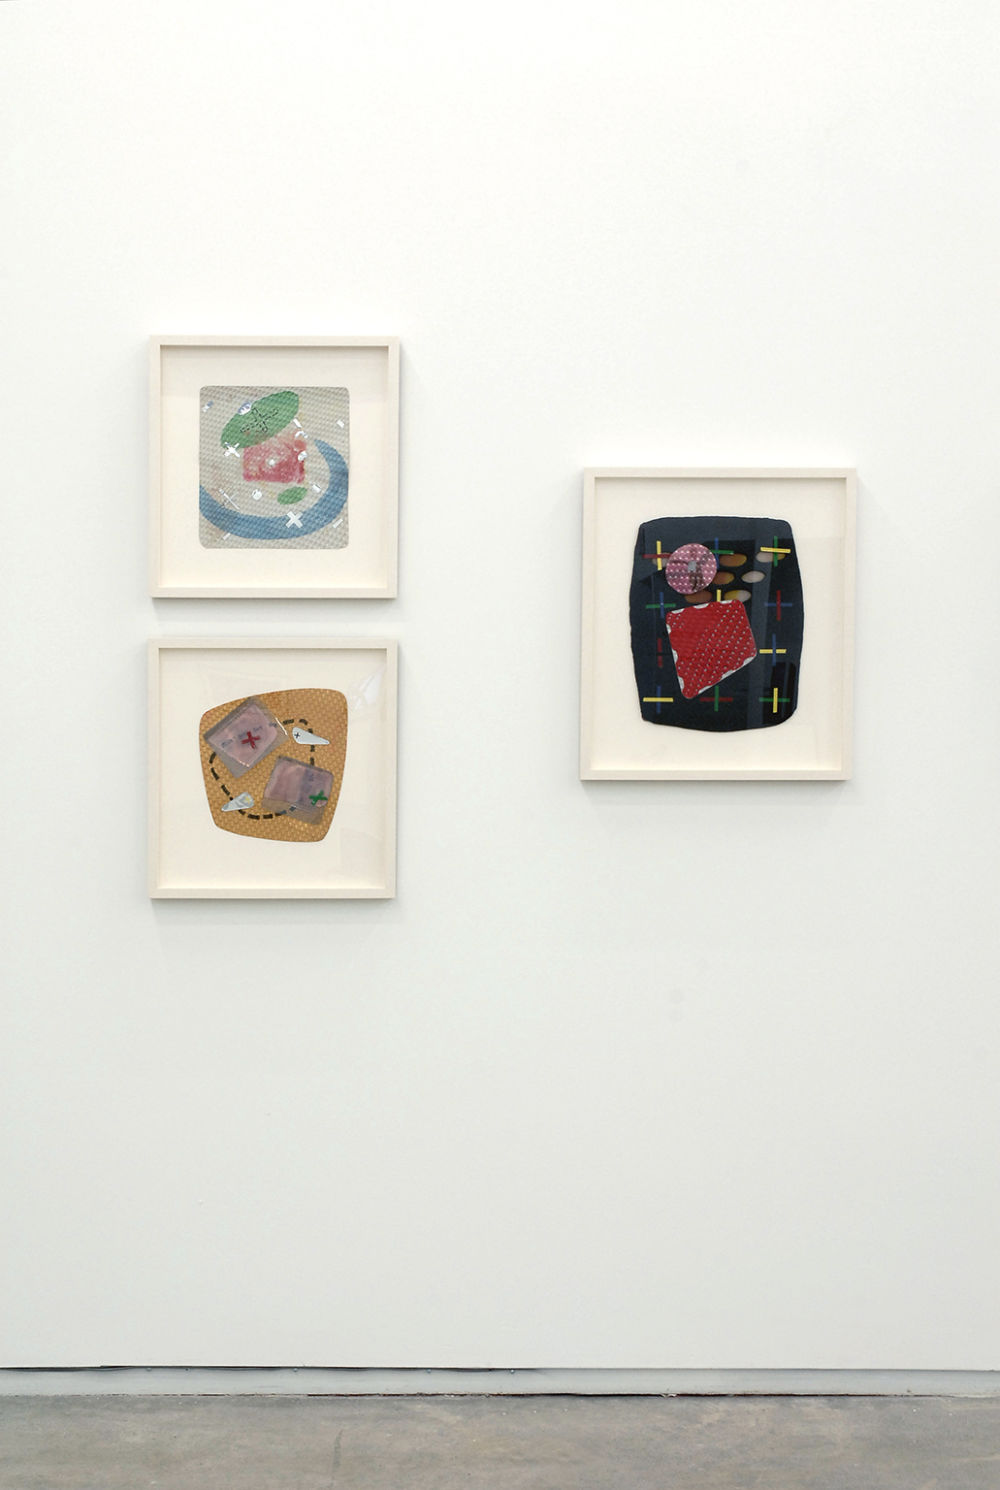 ​Jerry Pethick, installation view, Process as Work, Catriona Jeffries, 2008 by 